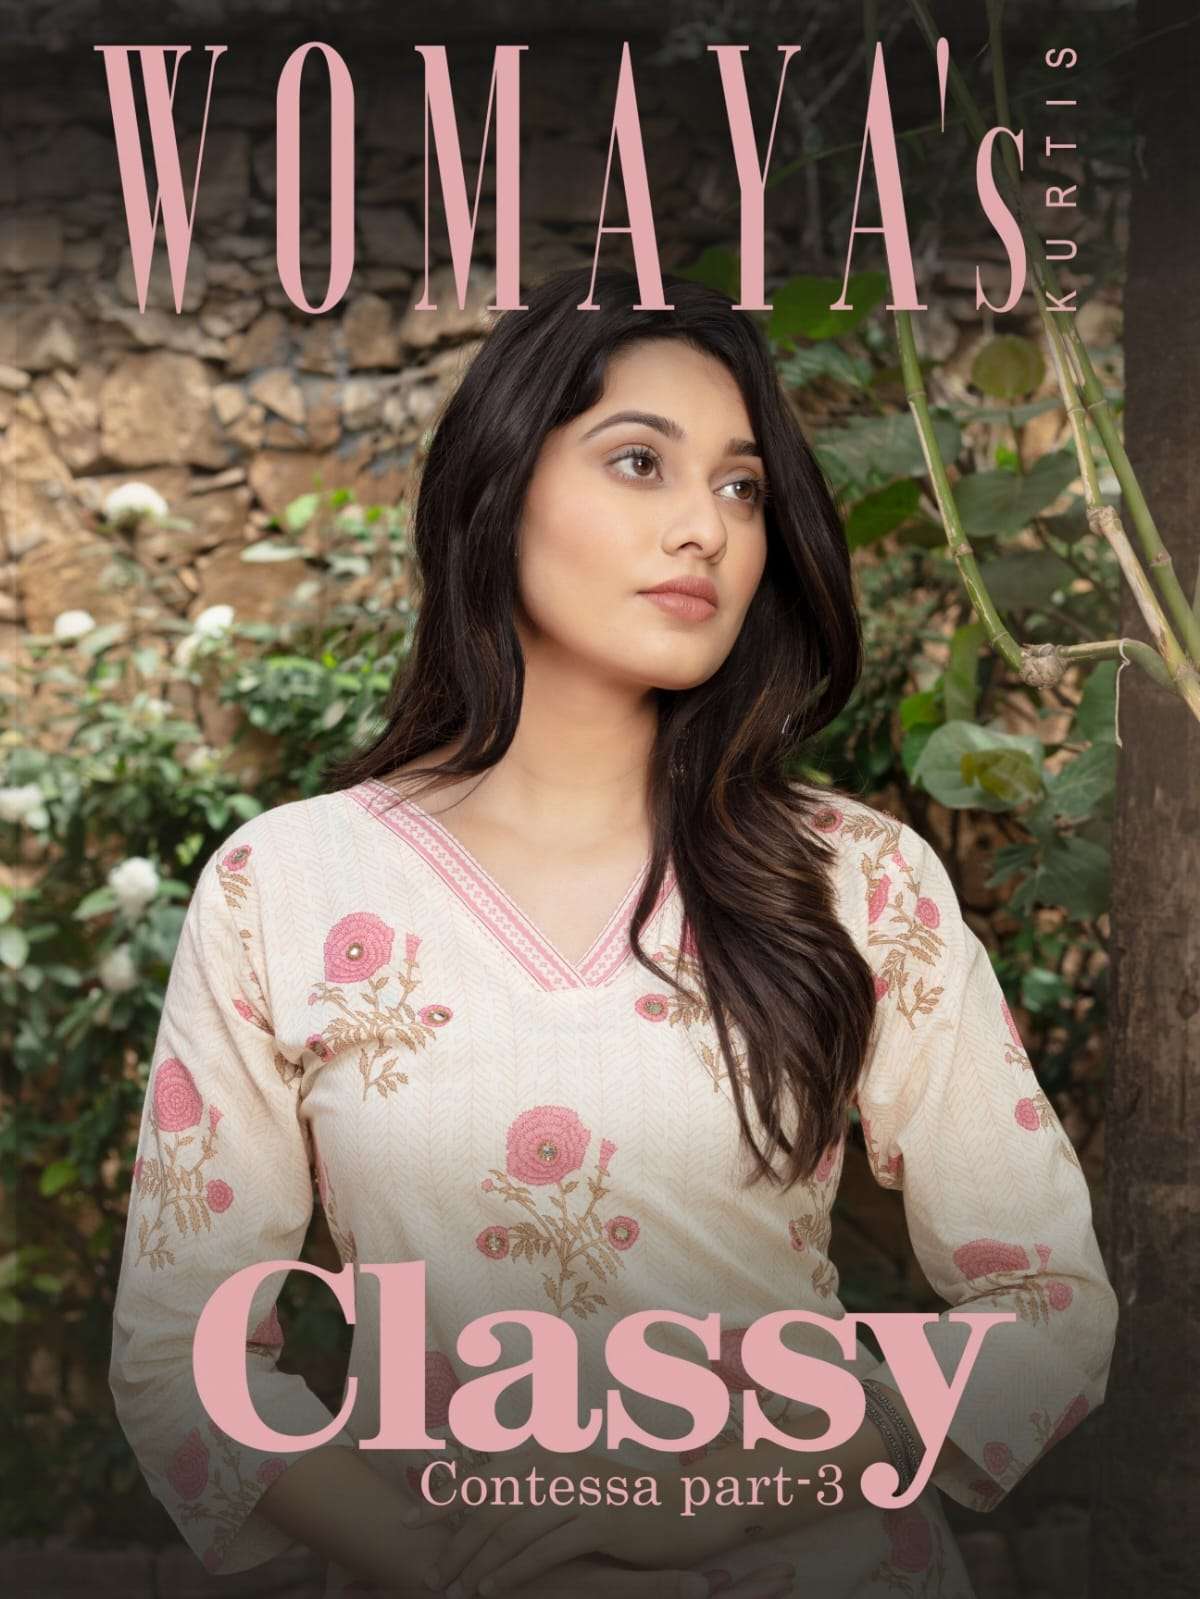 Womayas Classy Contessa Part 3 Summer Collection 3 pc set